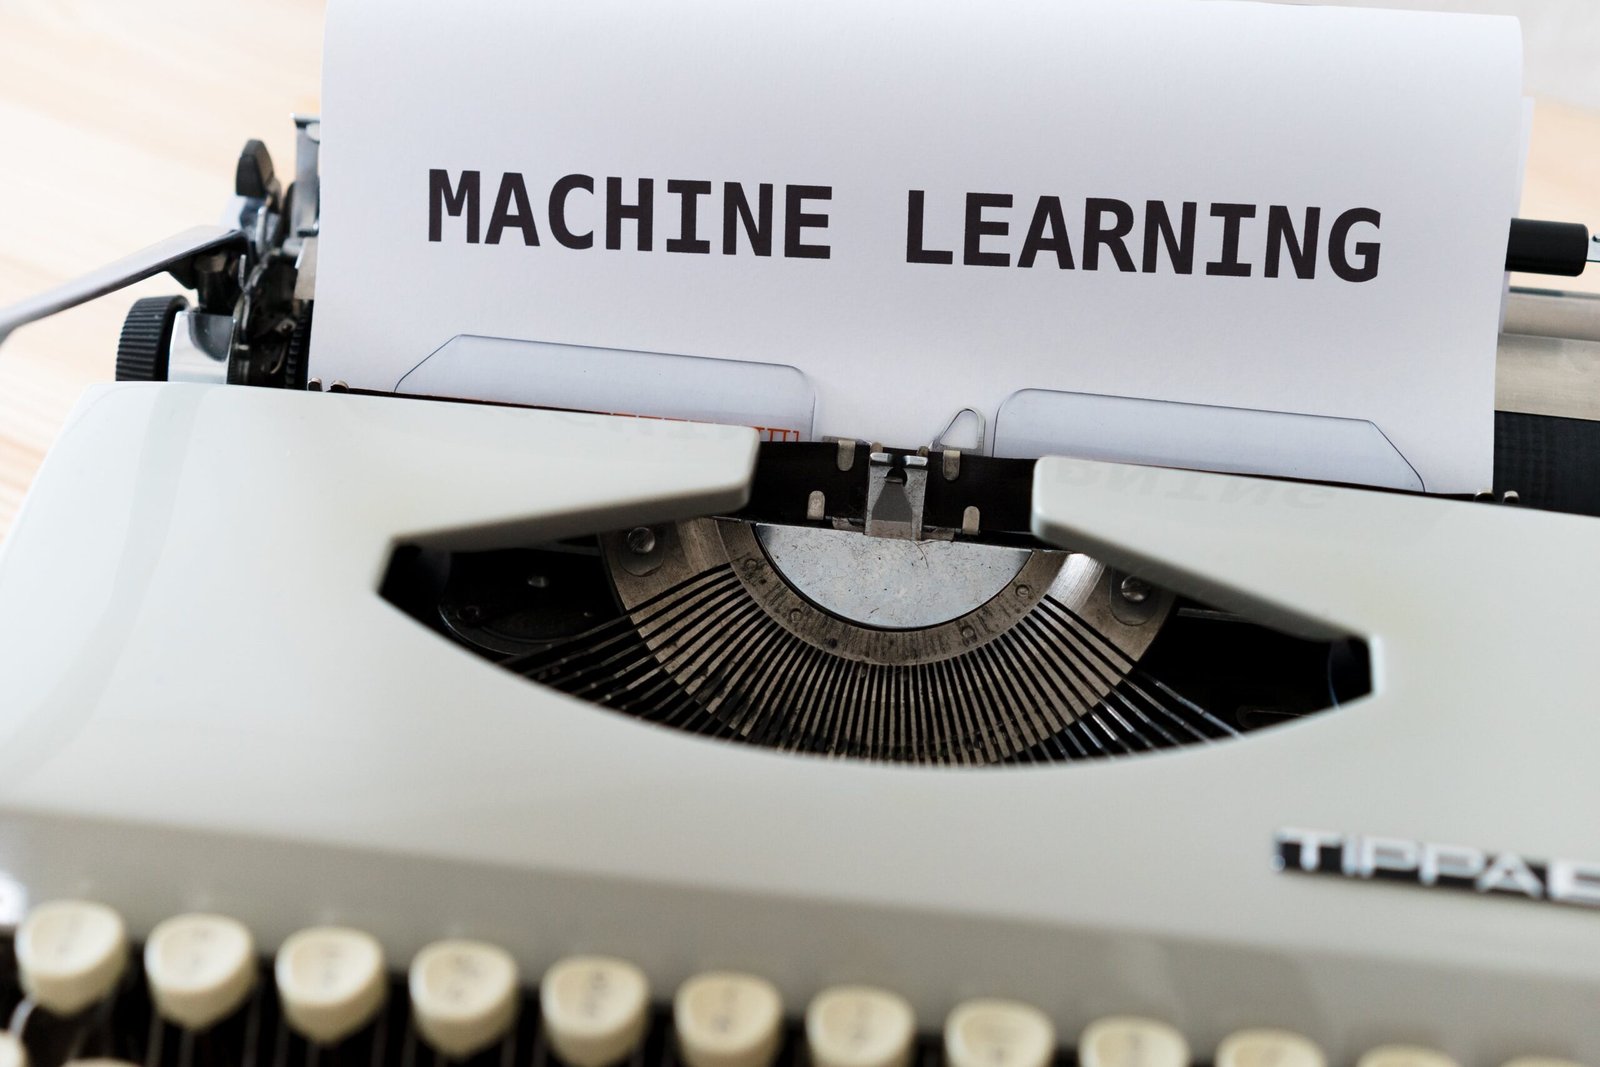 12 of the best machine learning courses you can take online for free